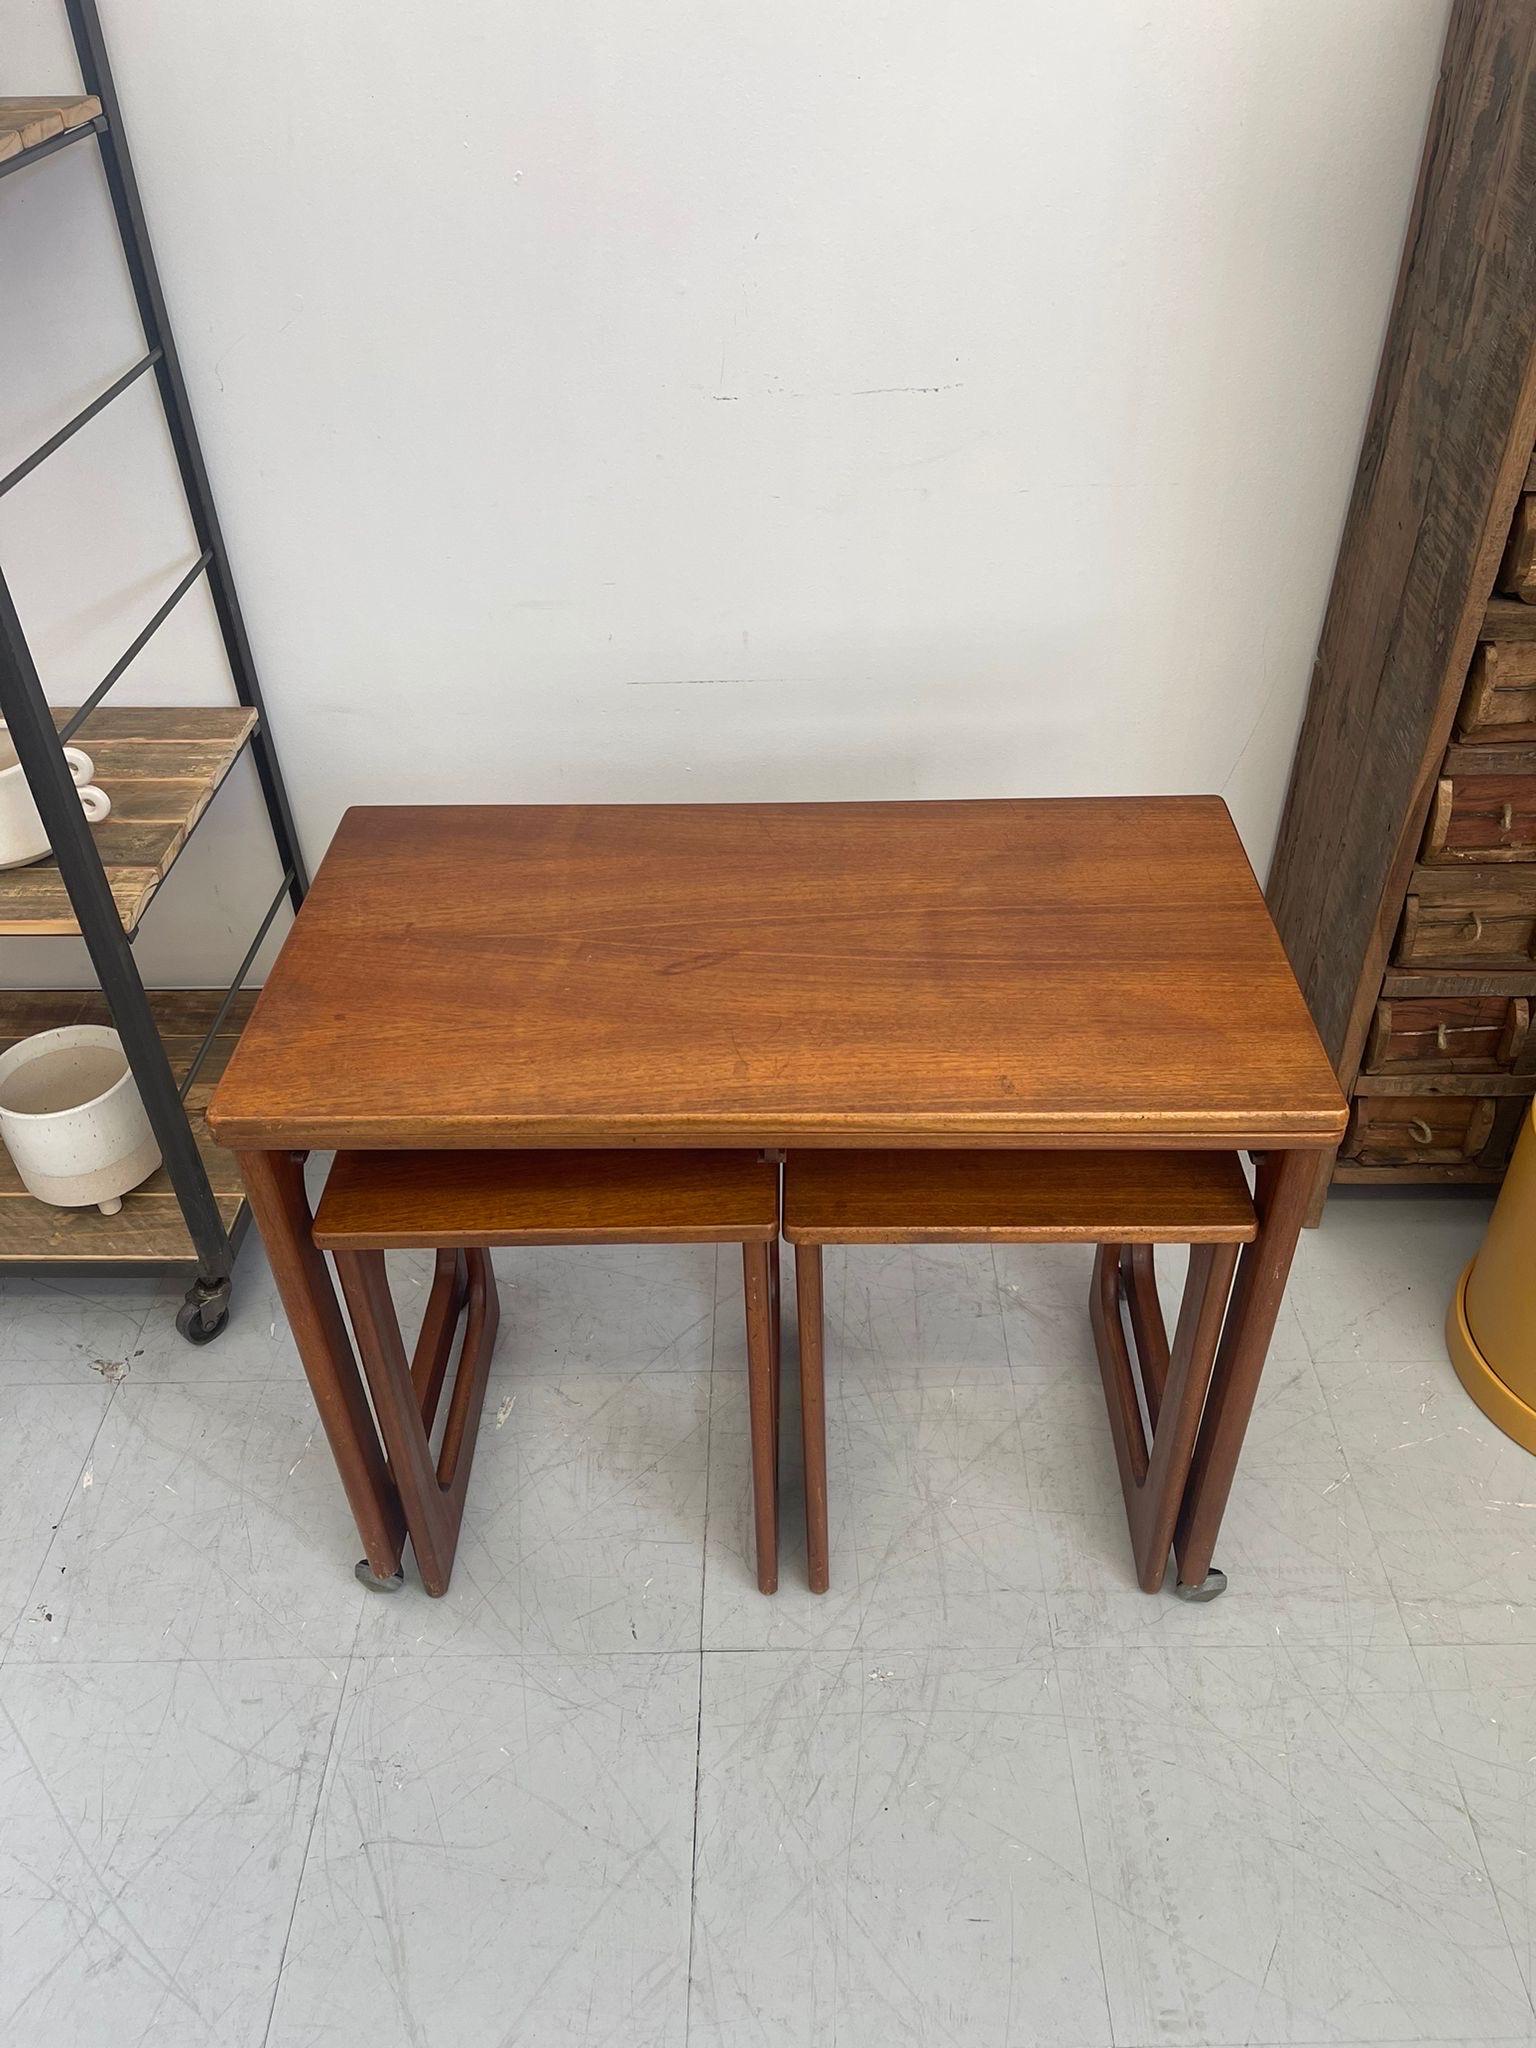 Late 20th Century Vintage Danish Modern Nesting Table With Flip Top Uk Import For Sale